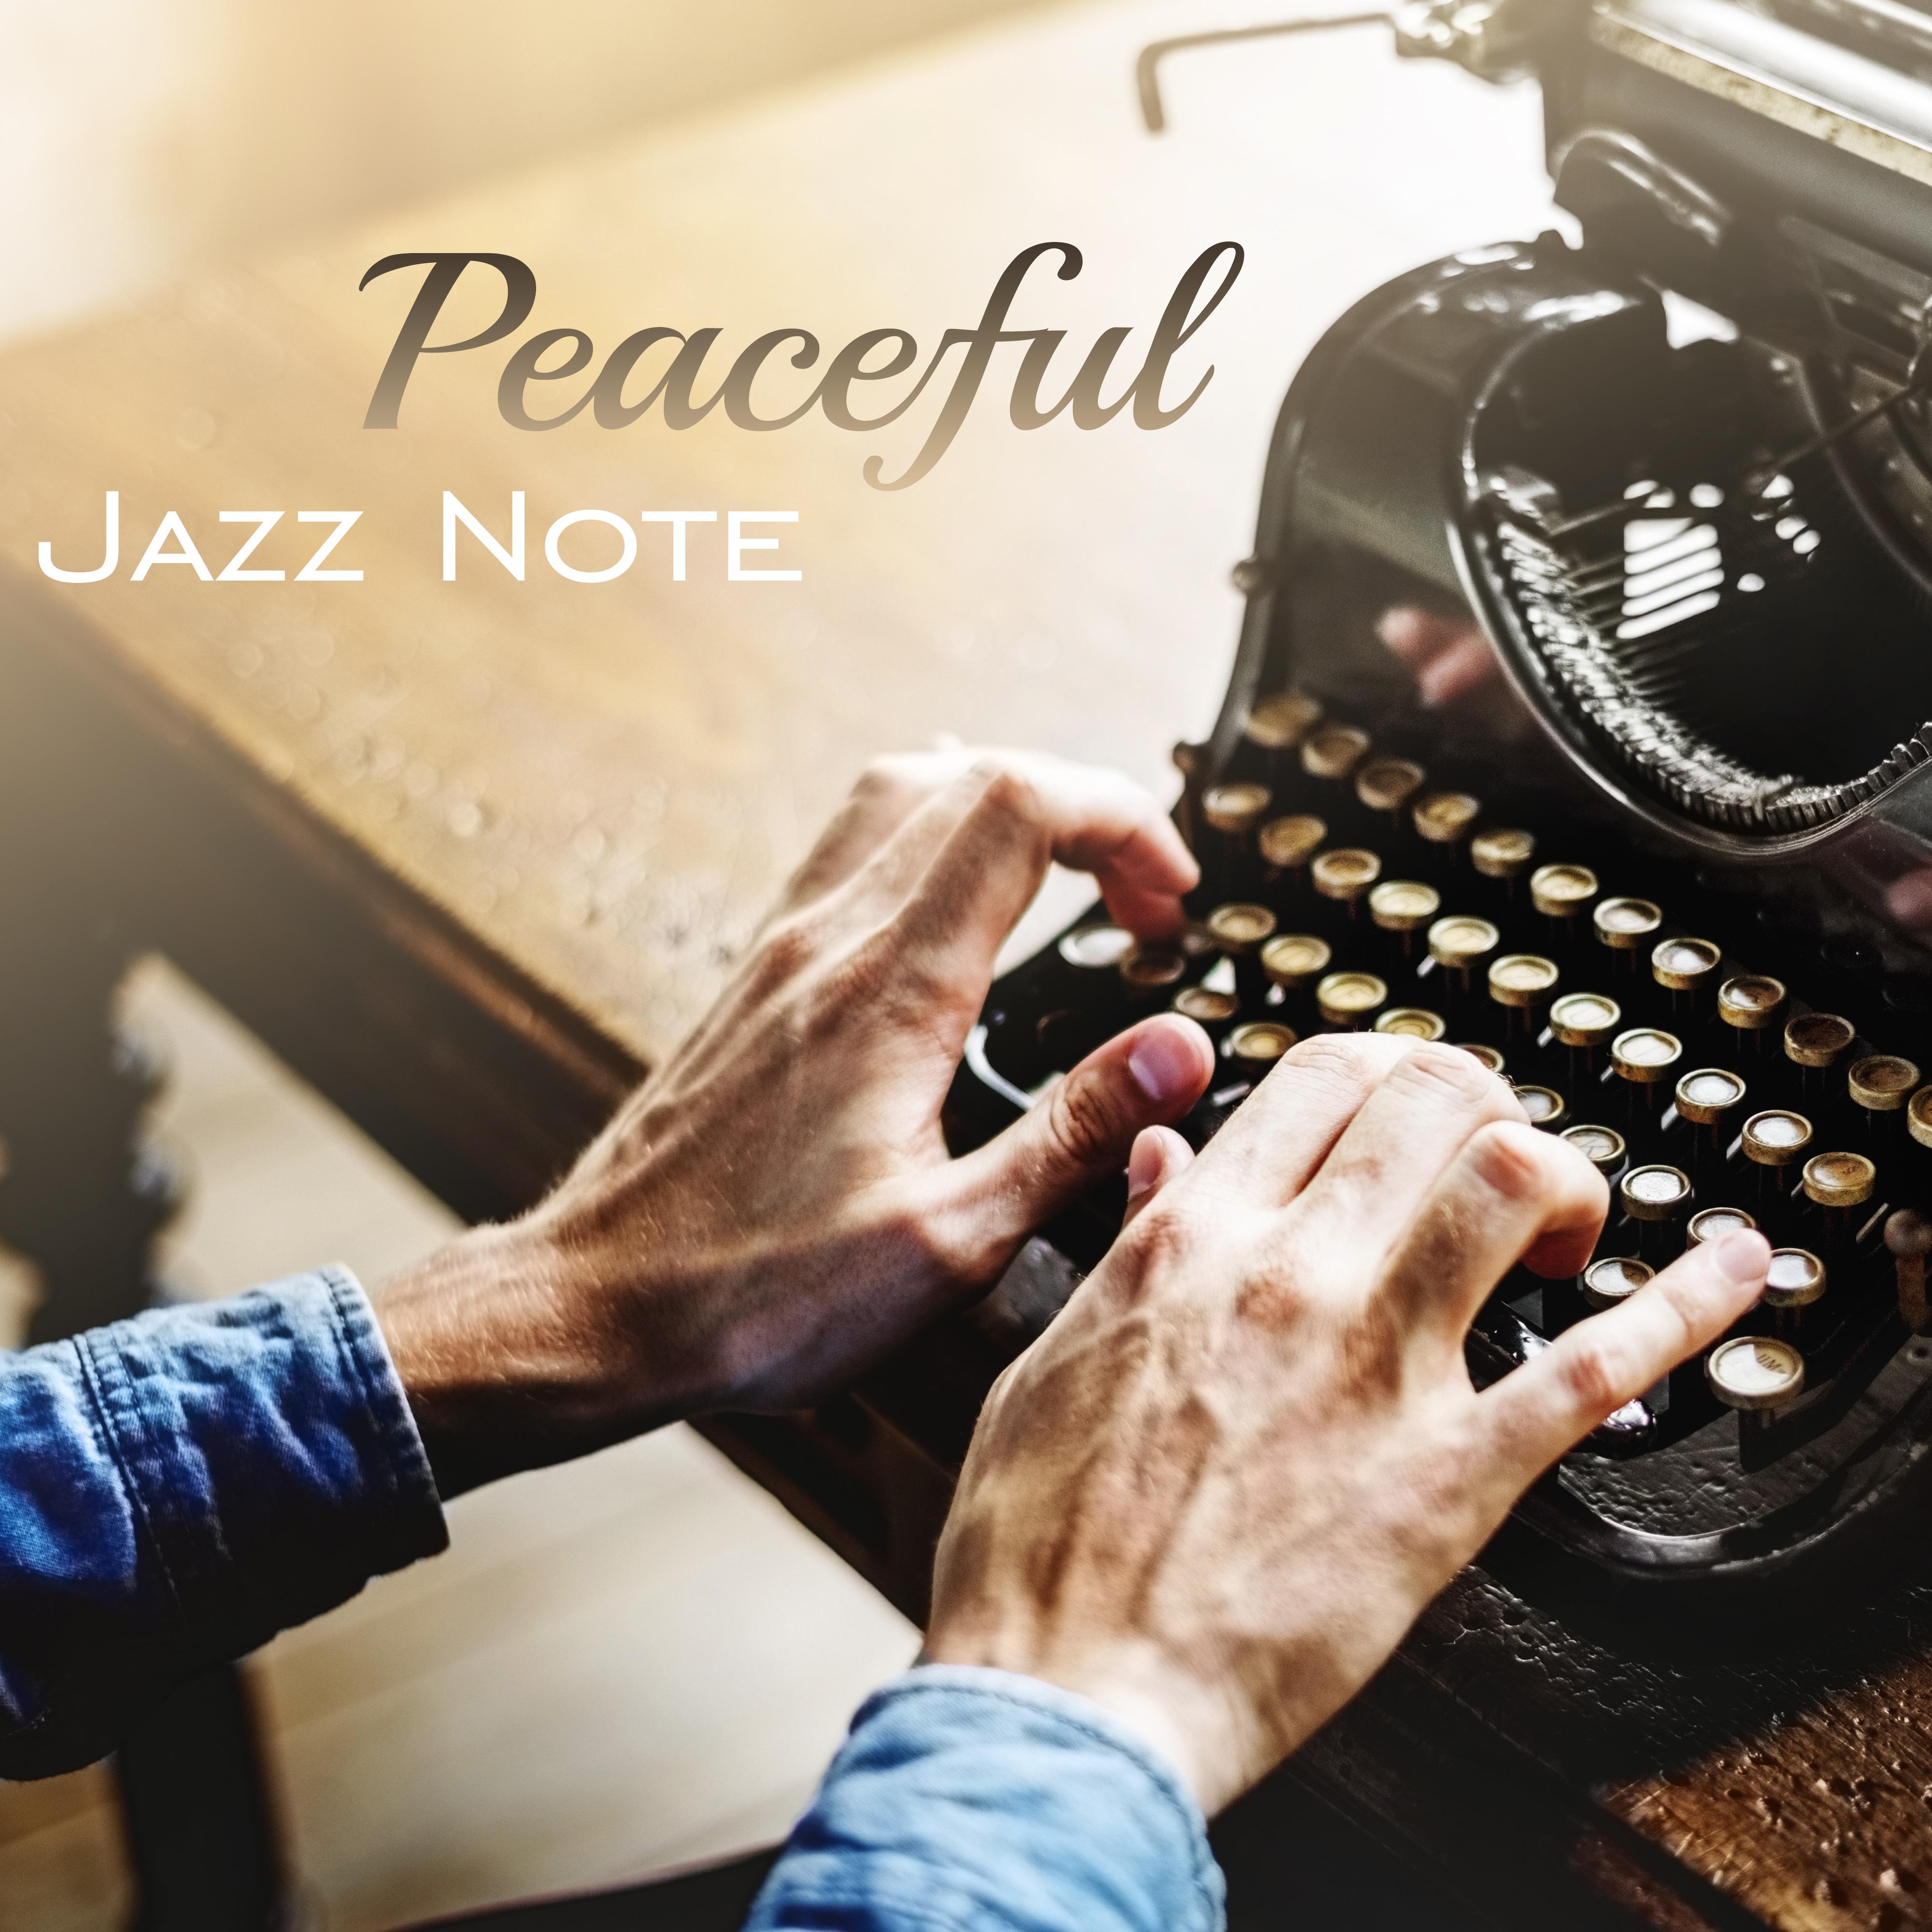 Peaceful Jazz Note  Easy Listening Jazz Music, Stress Relief, Calming Sounds, Mellow Night Jazz